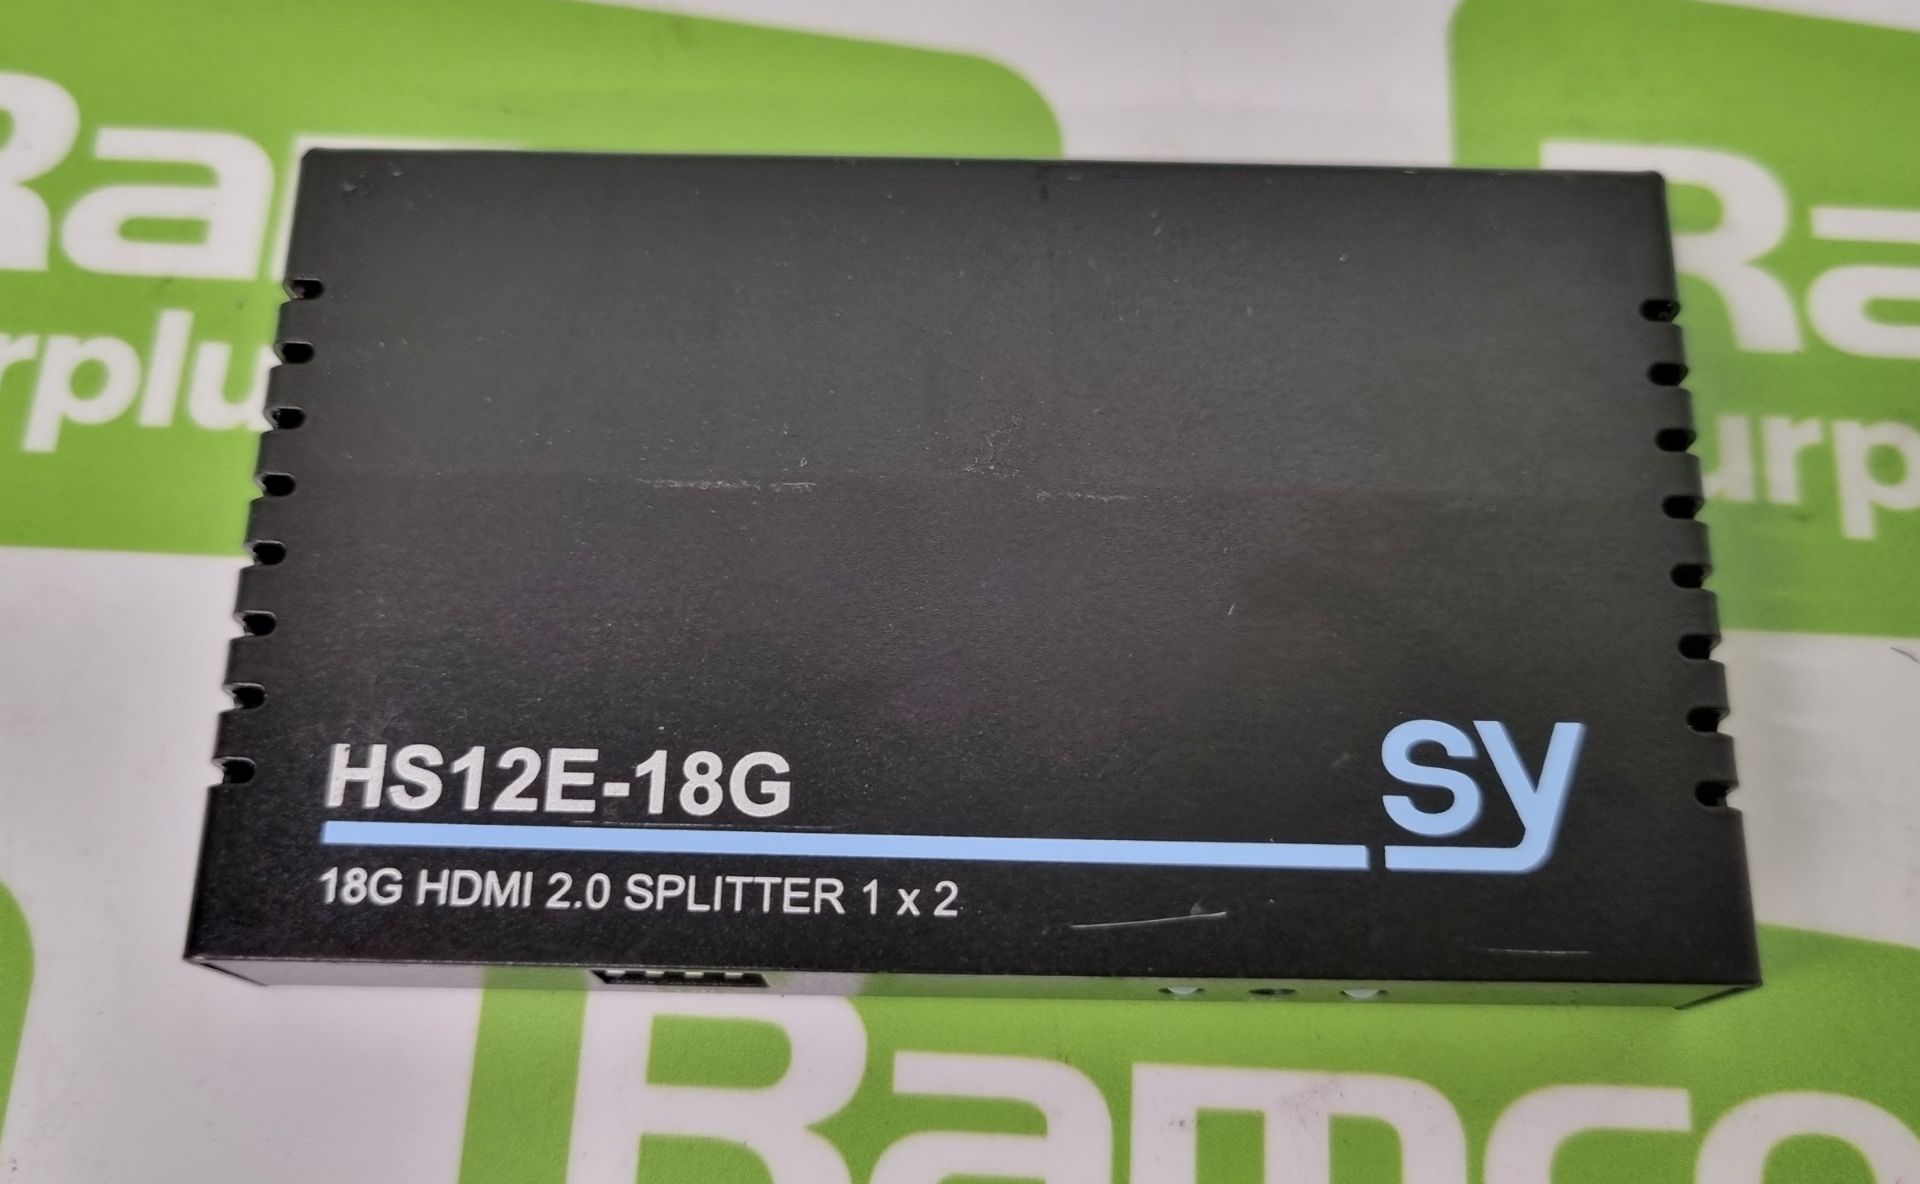 SY-HS12E-18G 1x2 HDMI 2.0 (18Gbps) splitter - Image 4 of 9